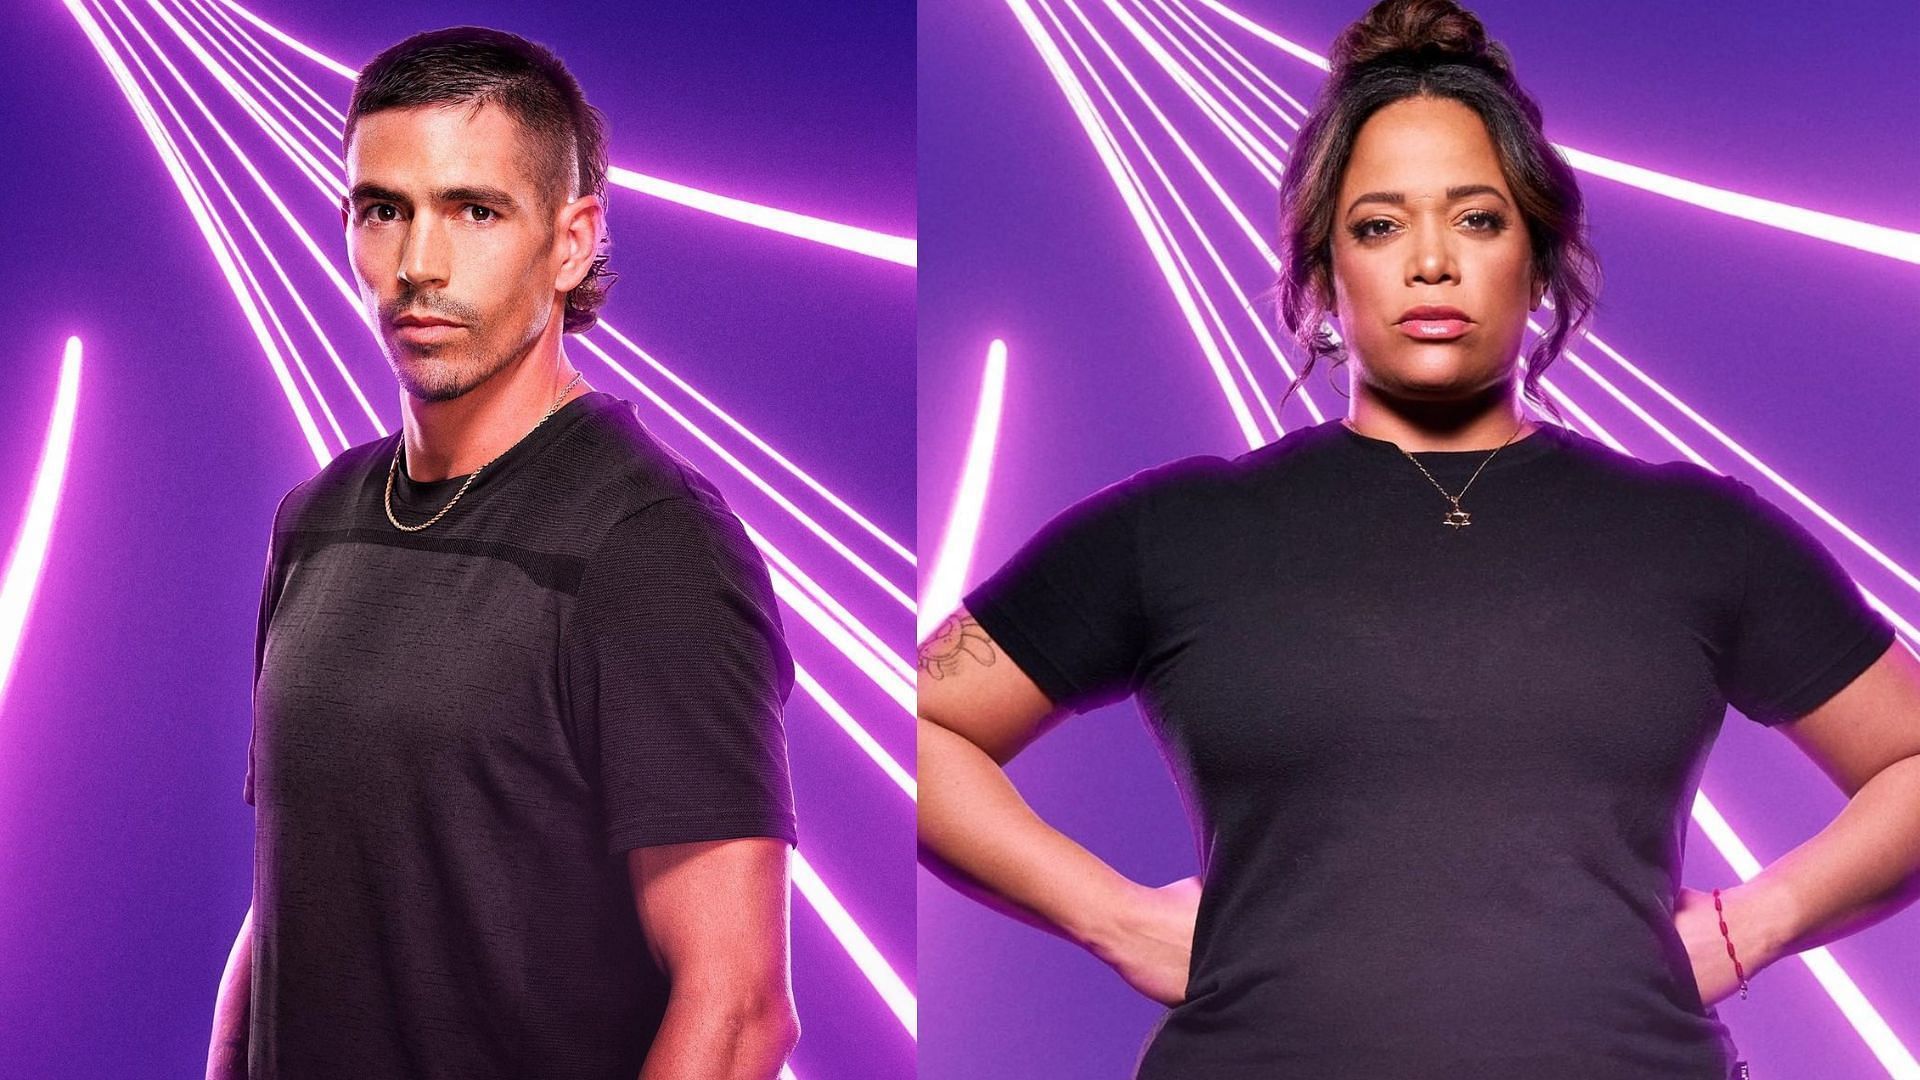 The Challenge all-stars Jordan Wiseley and Aneesa Ferreira to compete together in Season 38